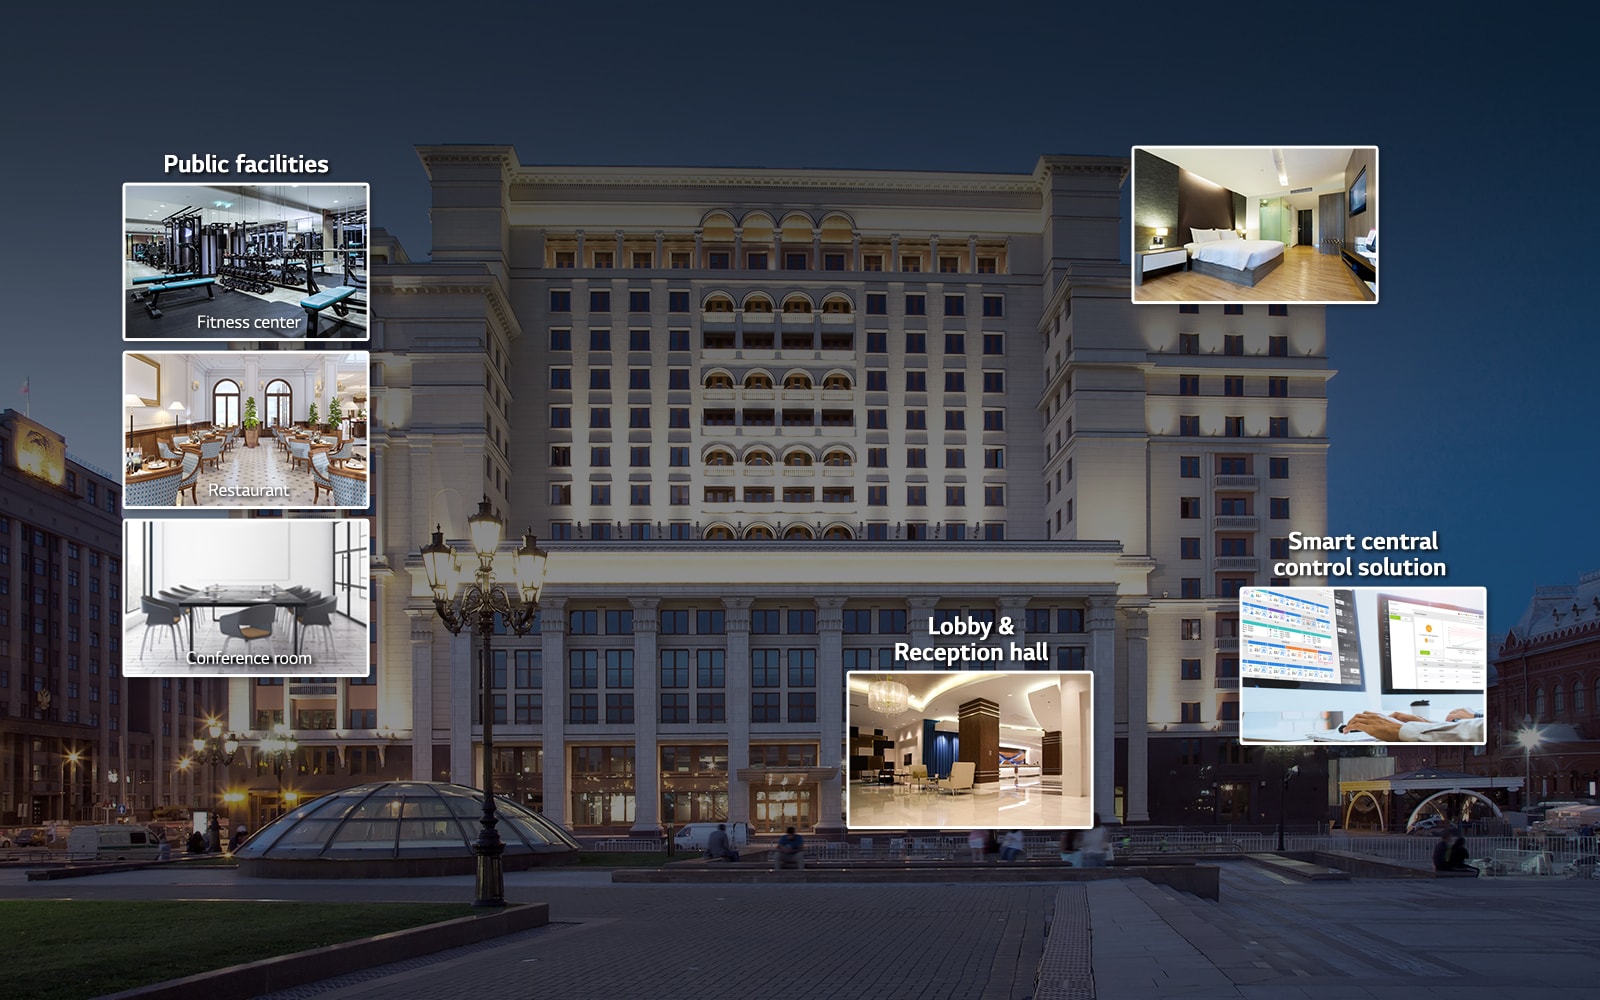 An image of a hotel with thumbnails of public facilities, a swimming pool, a guest room, a lobby, and a control center.